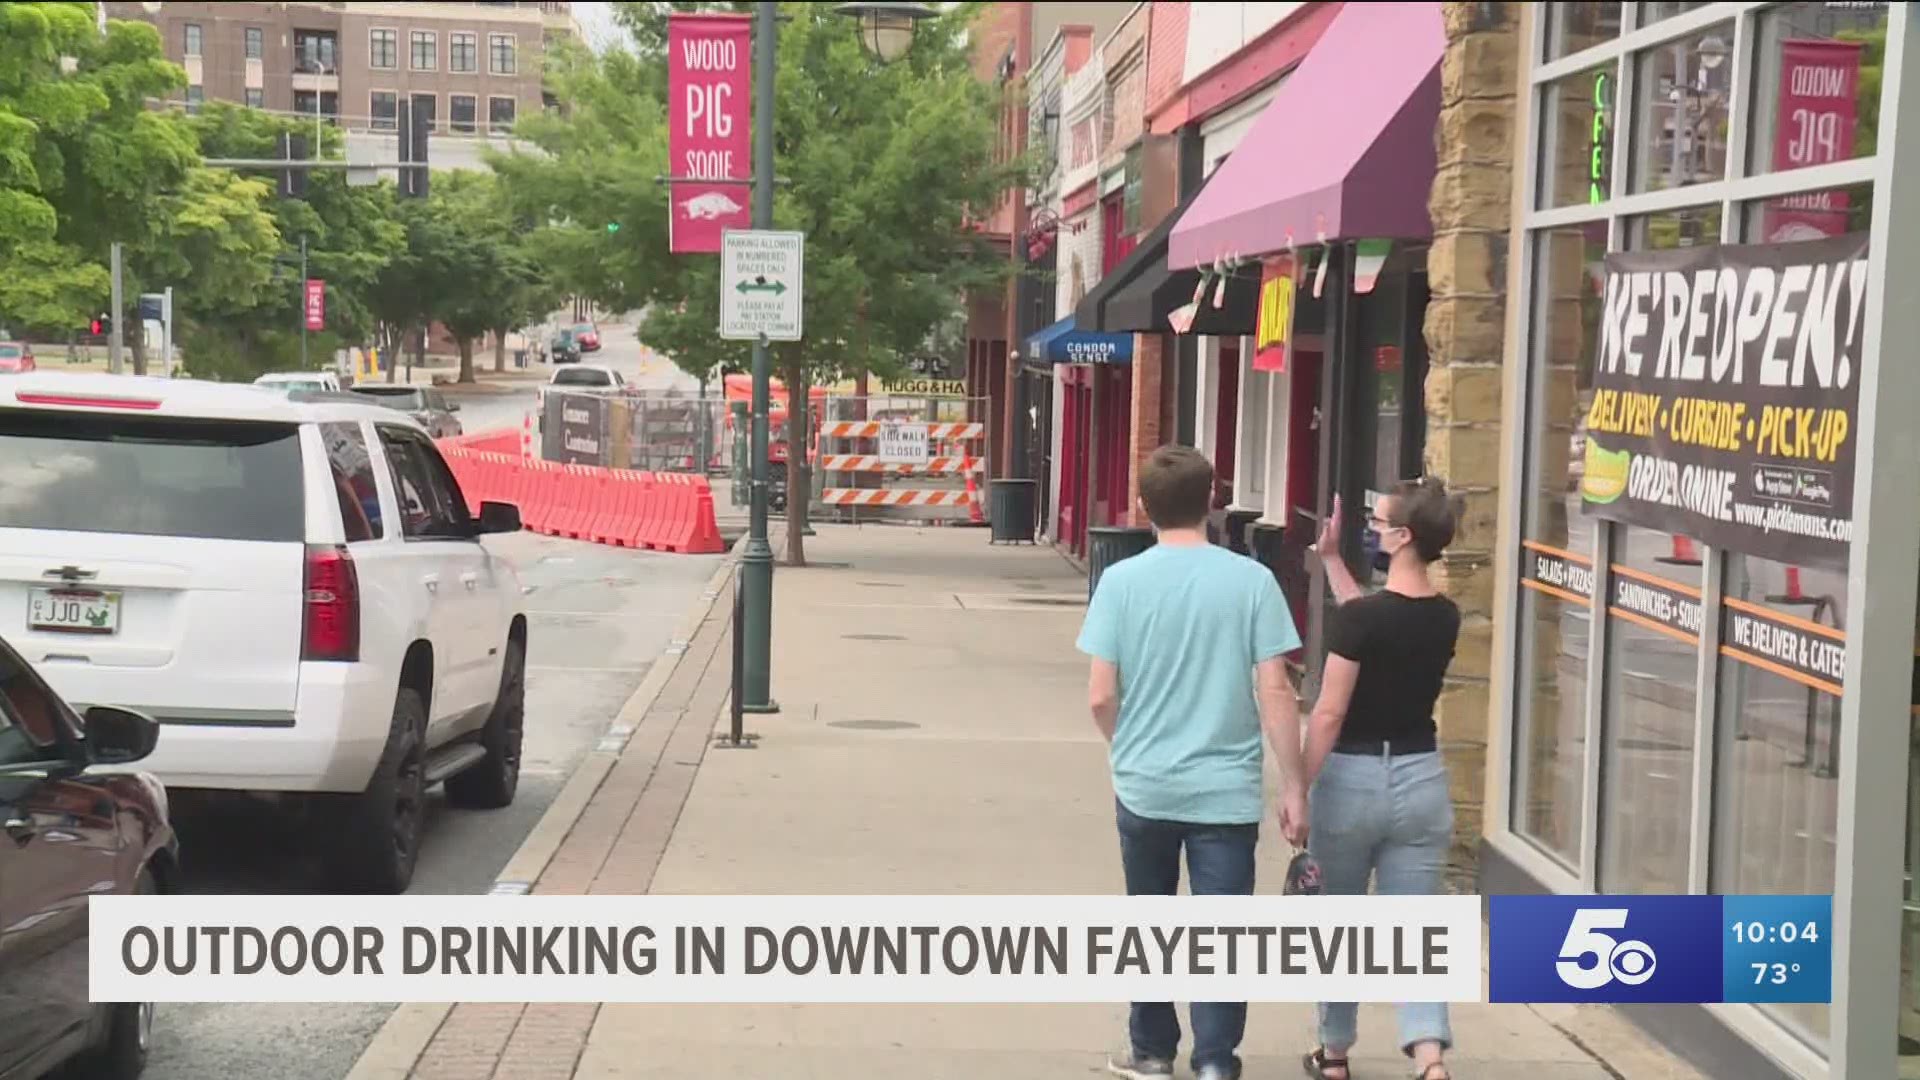 Visitors to Downtown Fayetteville will now be able to carry their alcoholic drinks outside in certain areas. https://bit.ly/3hyfW93